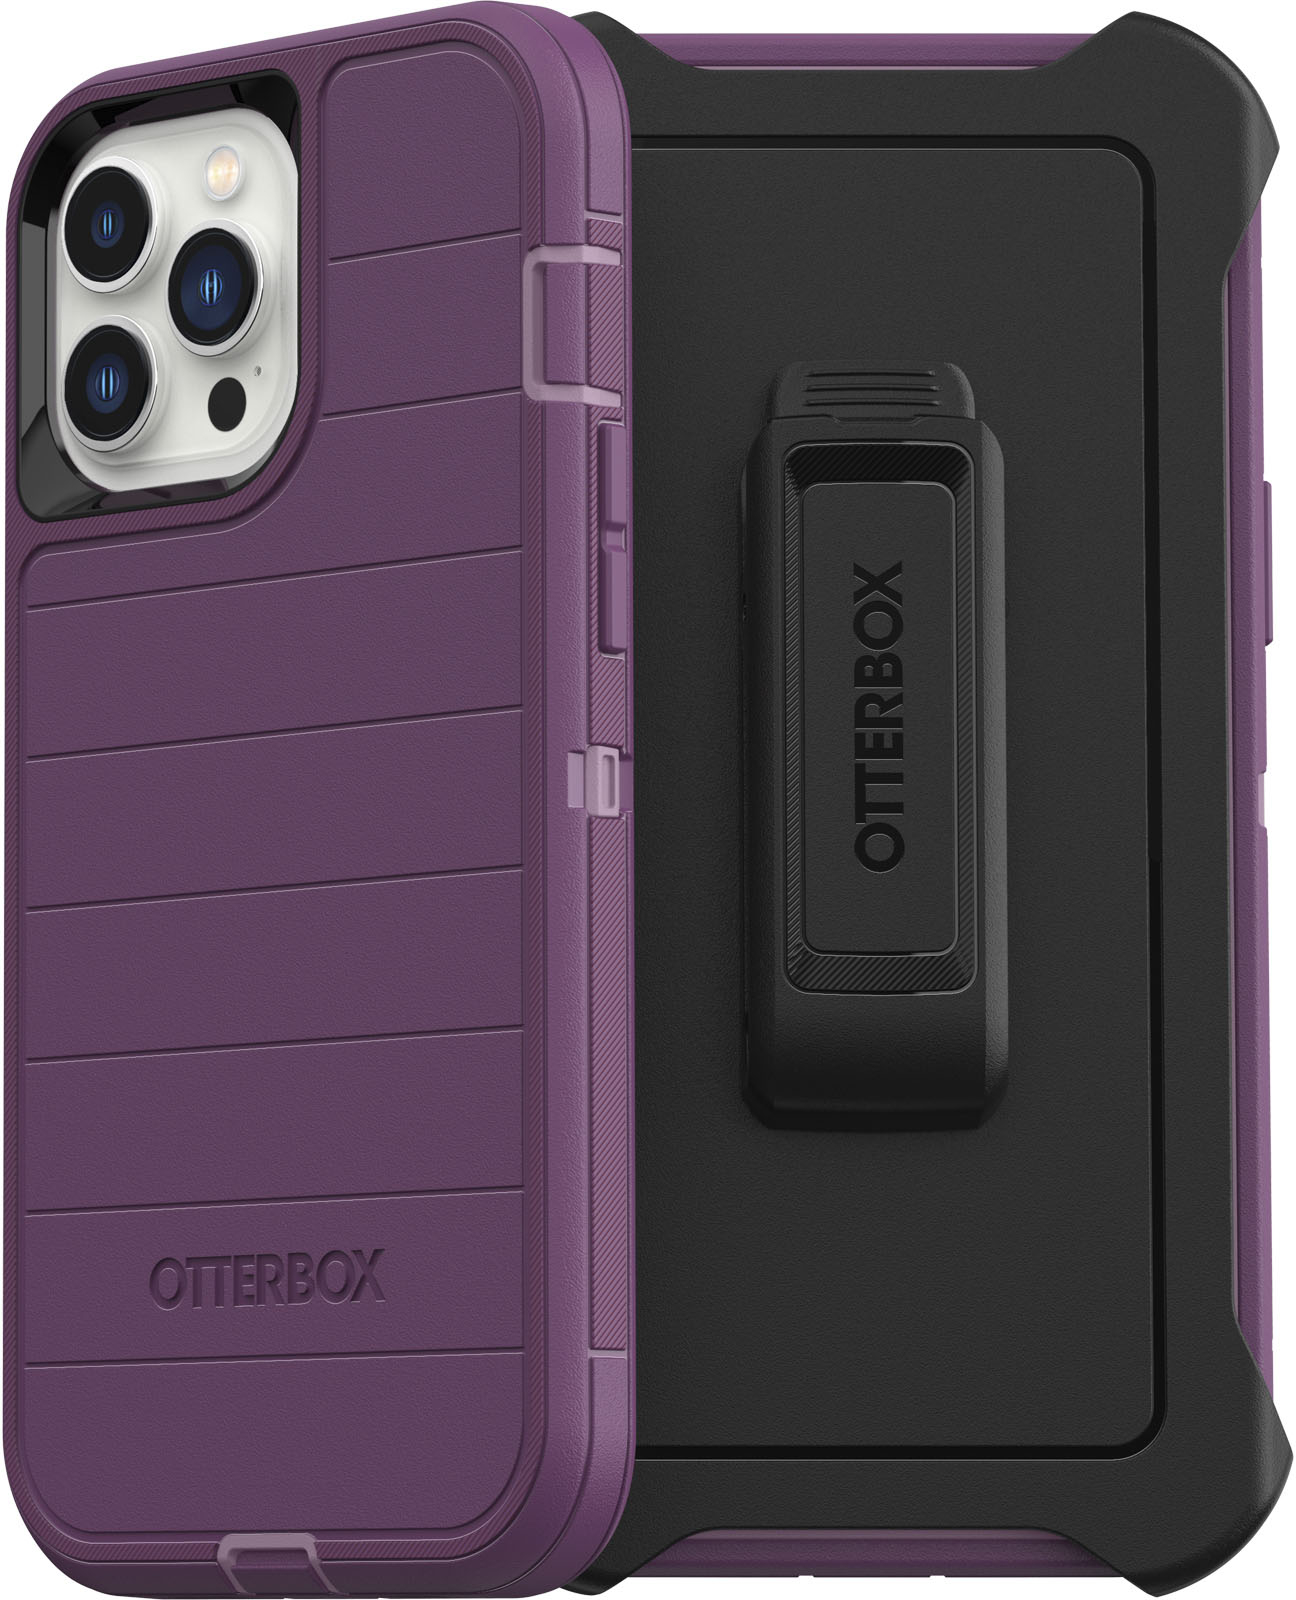 Angle View: OtterBox - Defender Series Pro Hard Shell for Apple iPhone 13 Pro Max and iPhone 12 Pro Max - Happy Purple